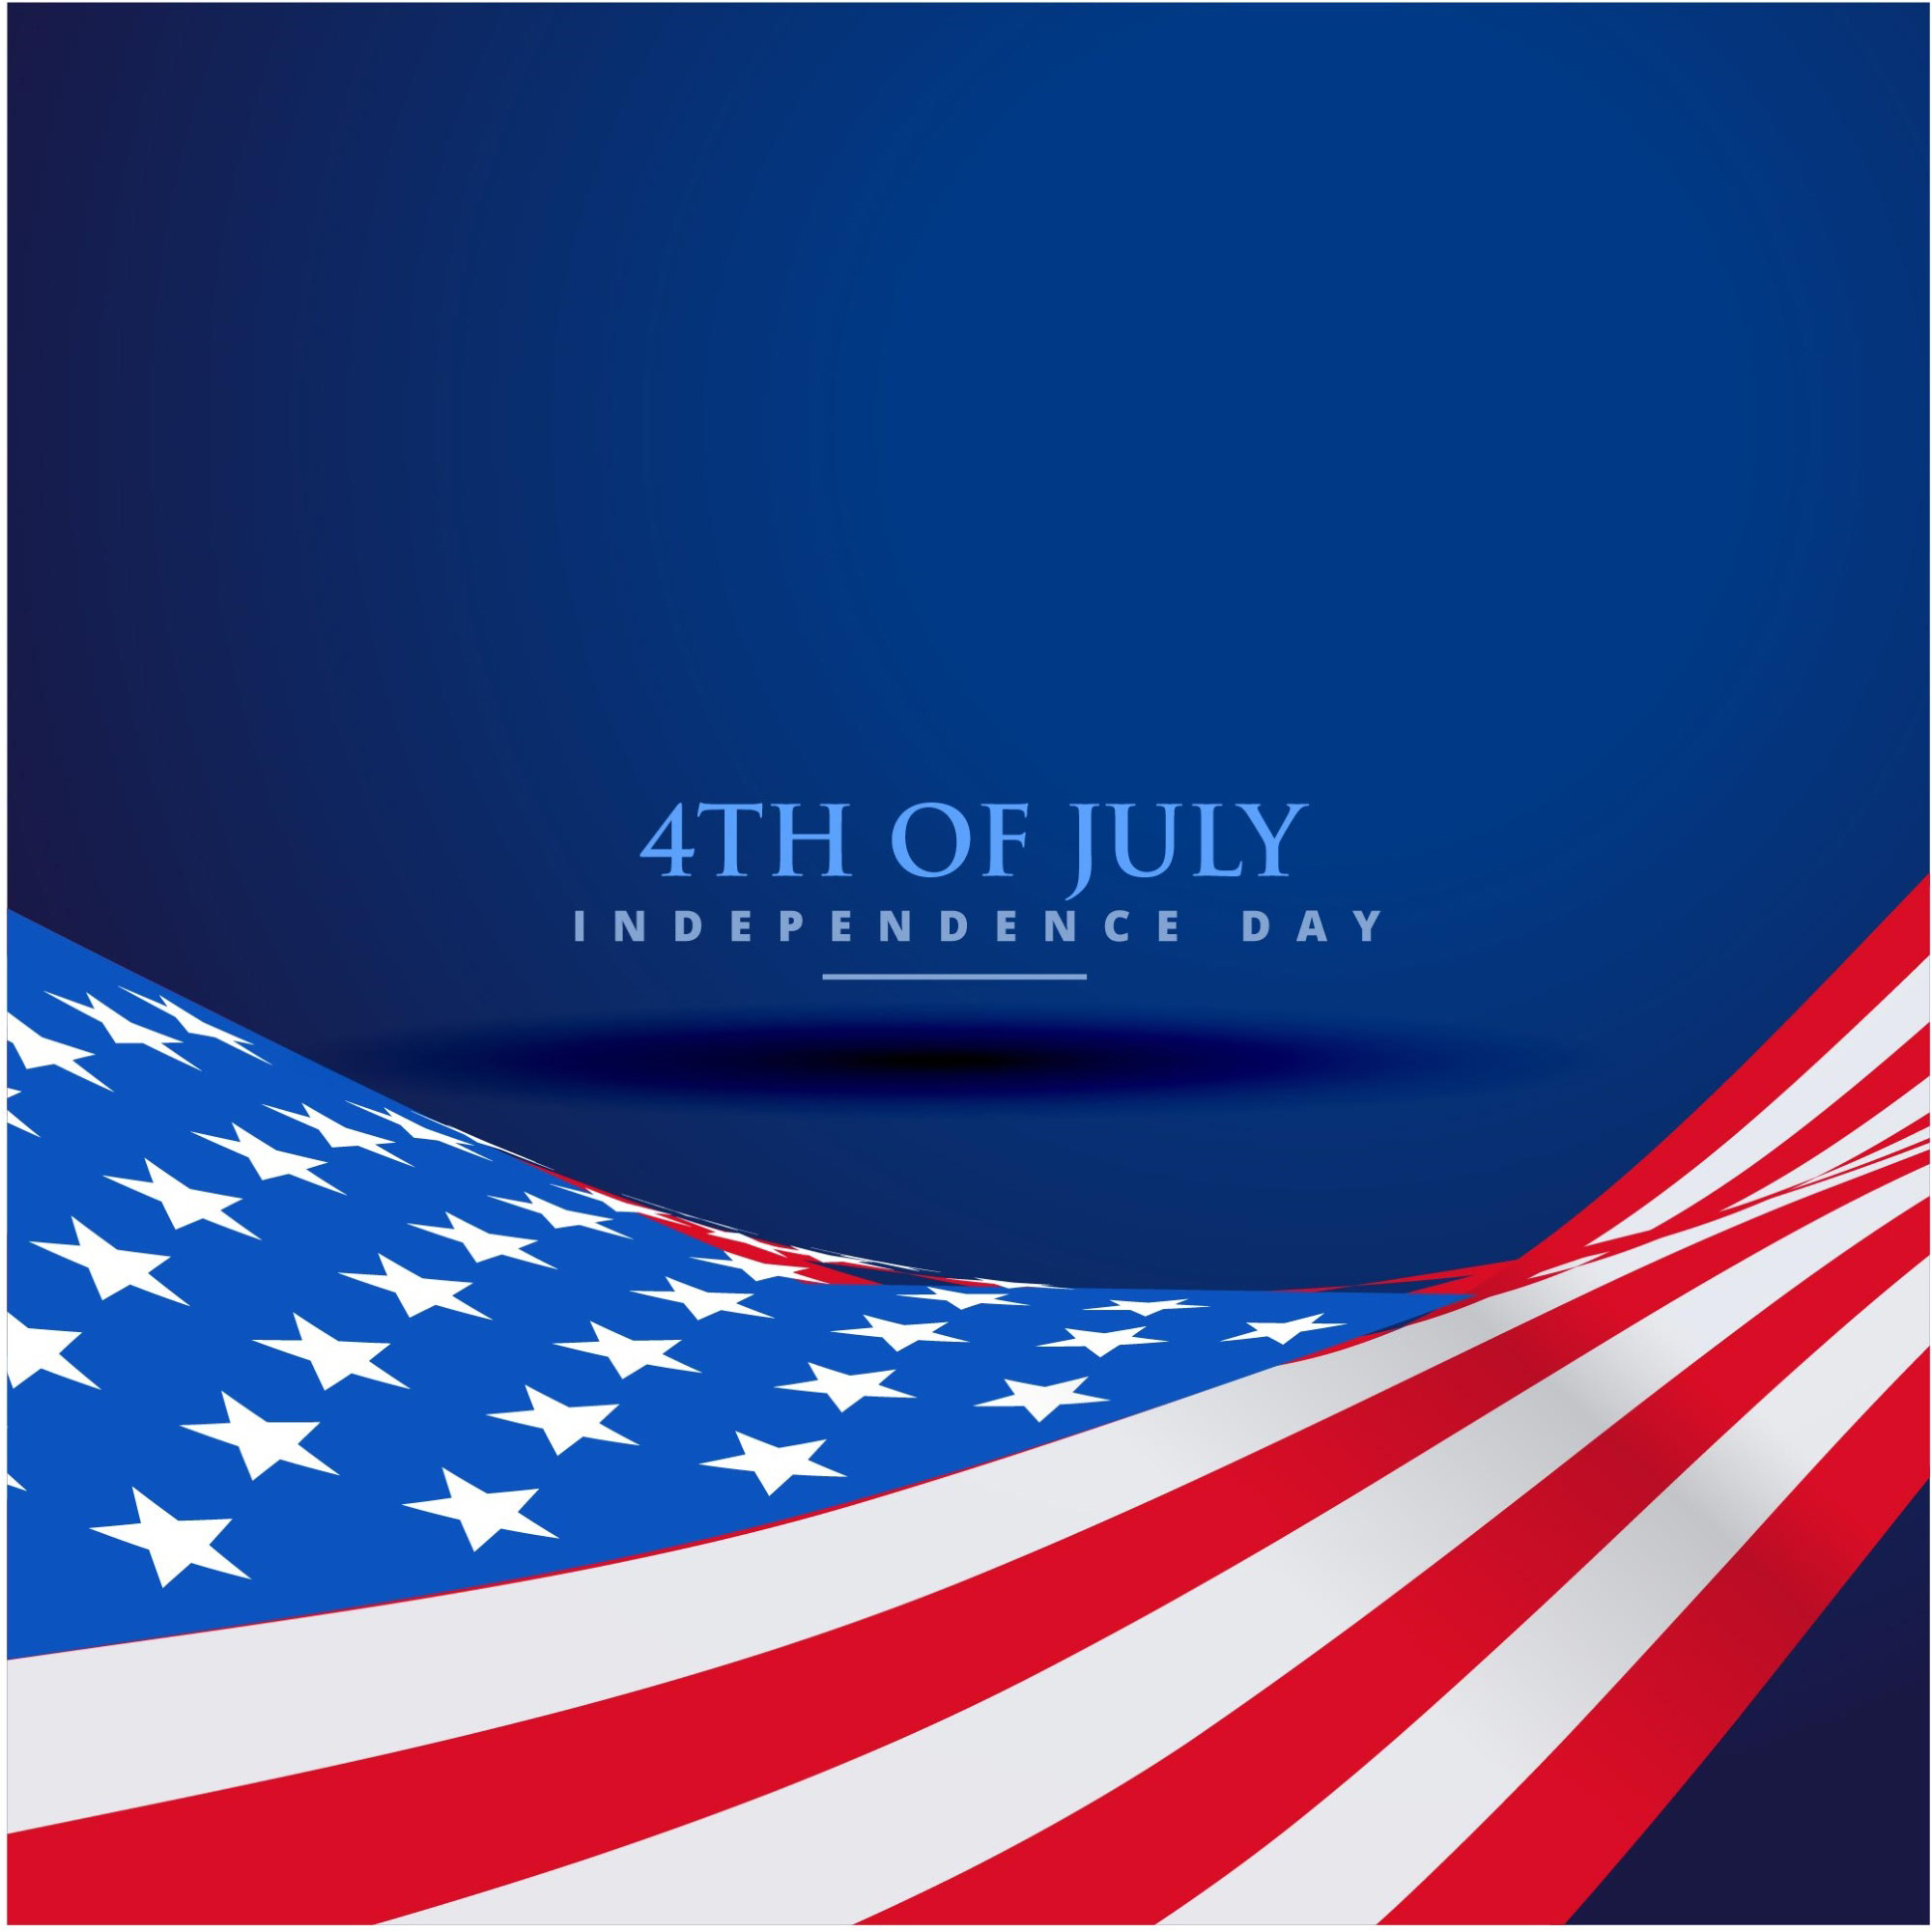 5550 28075 Usa Independence Day Vector - American Wave Flag Background - HD Wallpaper 